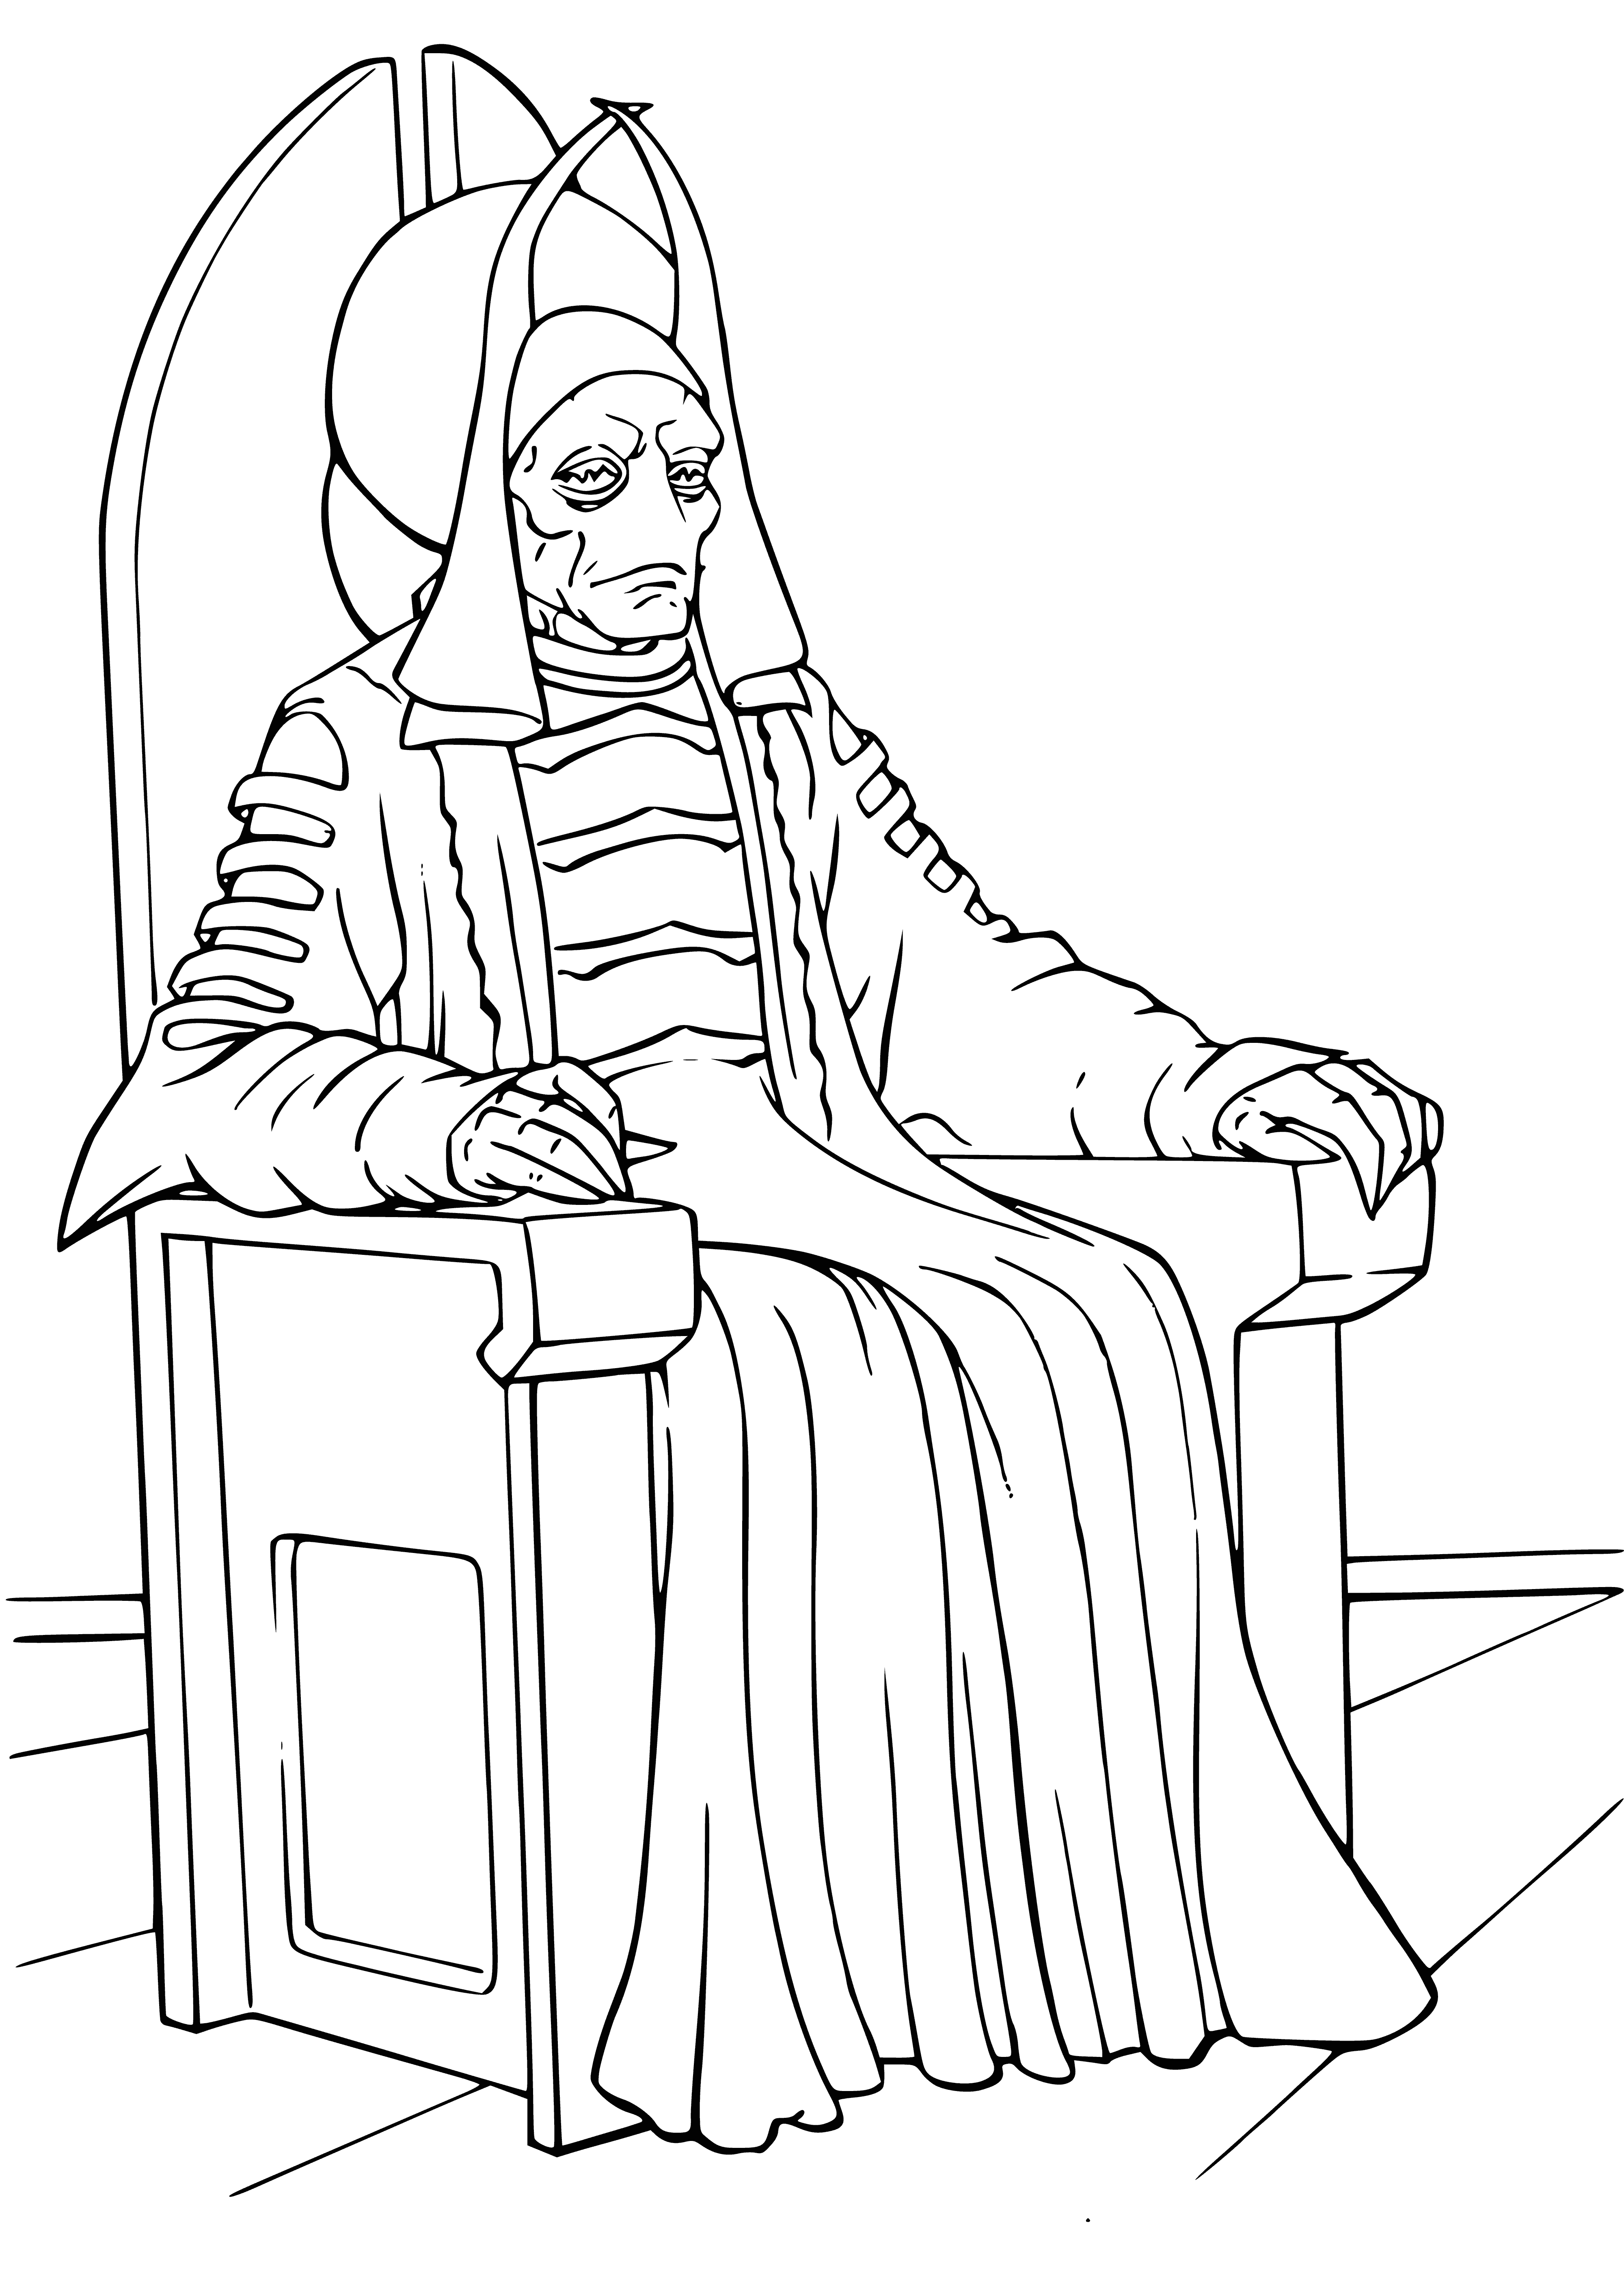 Rune Haako's assistant coloring page